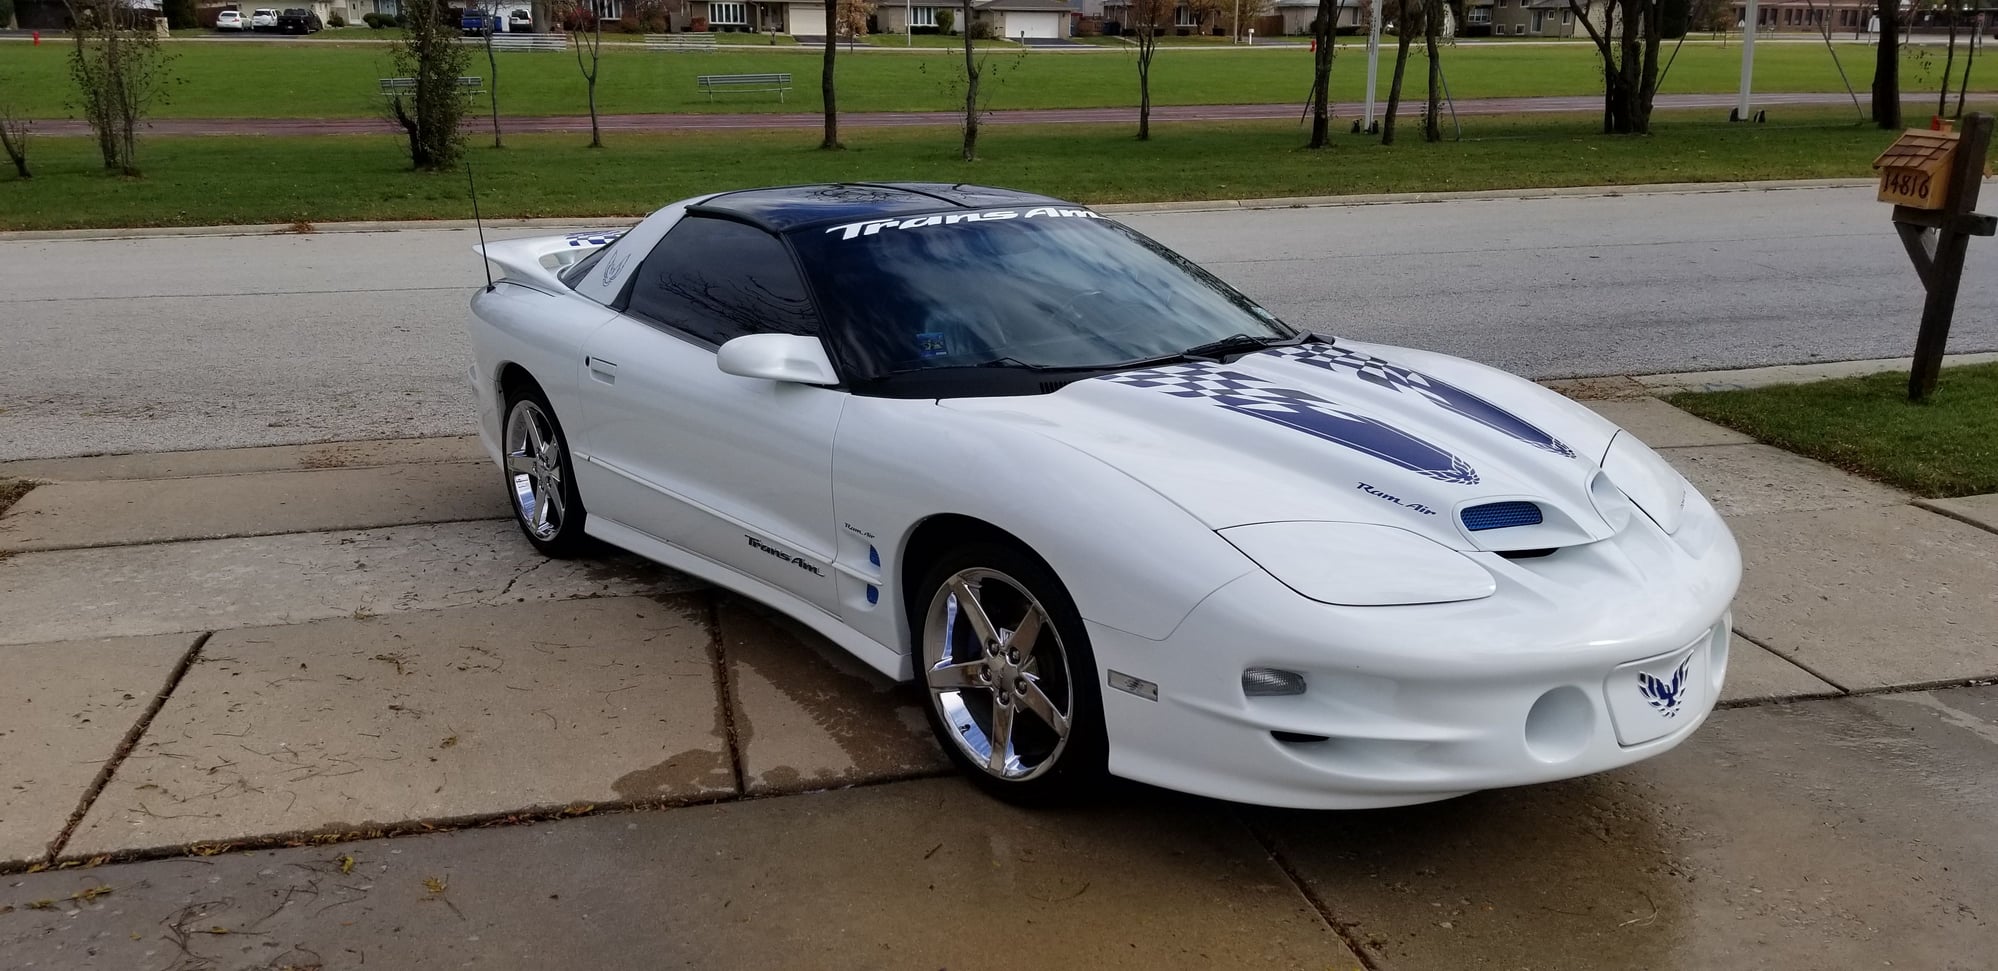 2002 Pontiac Firebird - 2002 WS6 Supercharged - Reduced again!! - Used - VIN 2G2FV22G422117314 - 68,000 Miles - 8 cyl - 2WD - Automatic - Coupe - White - Oak Forest, IL 60452, United States